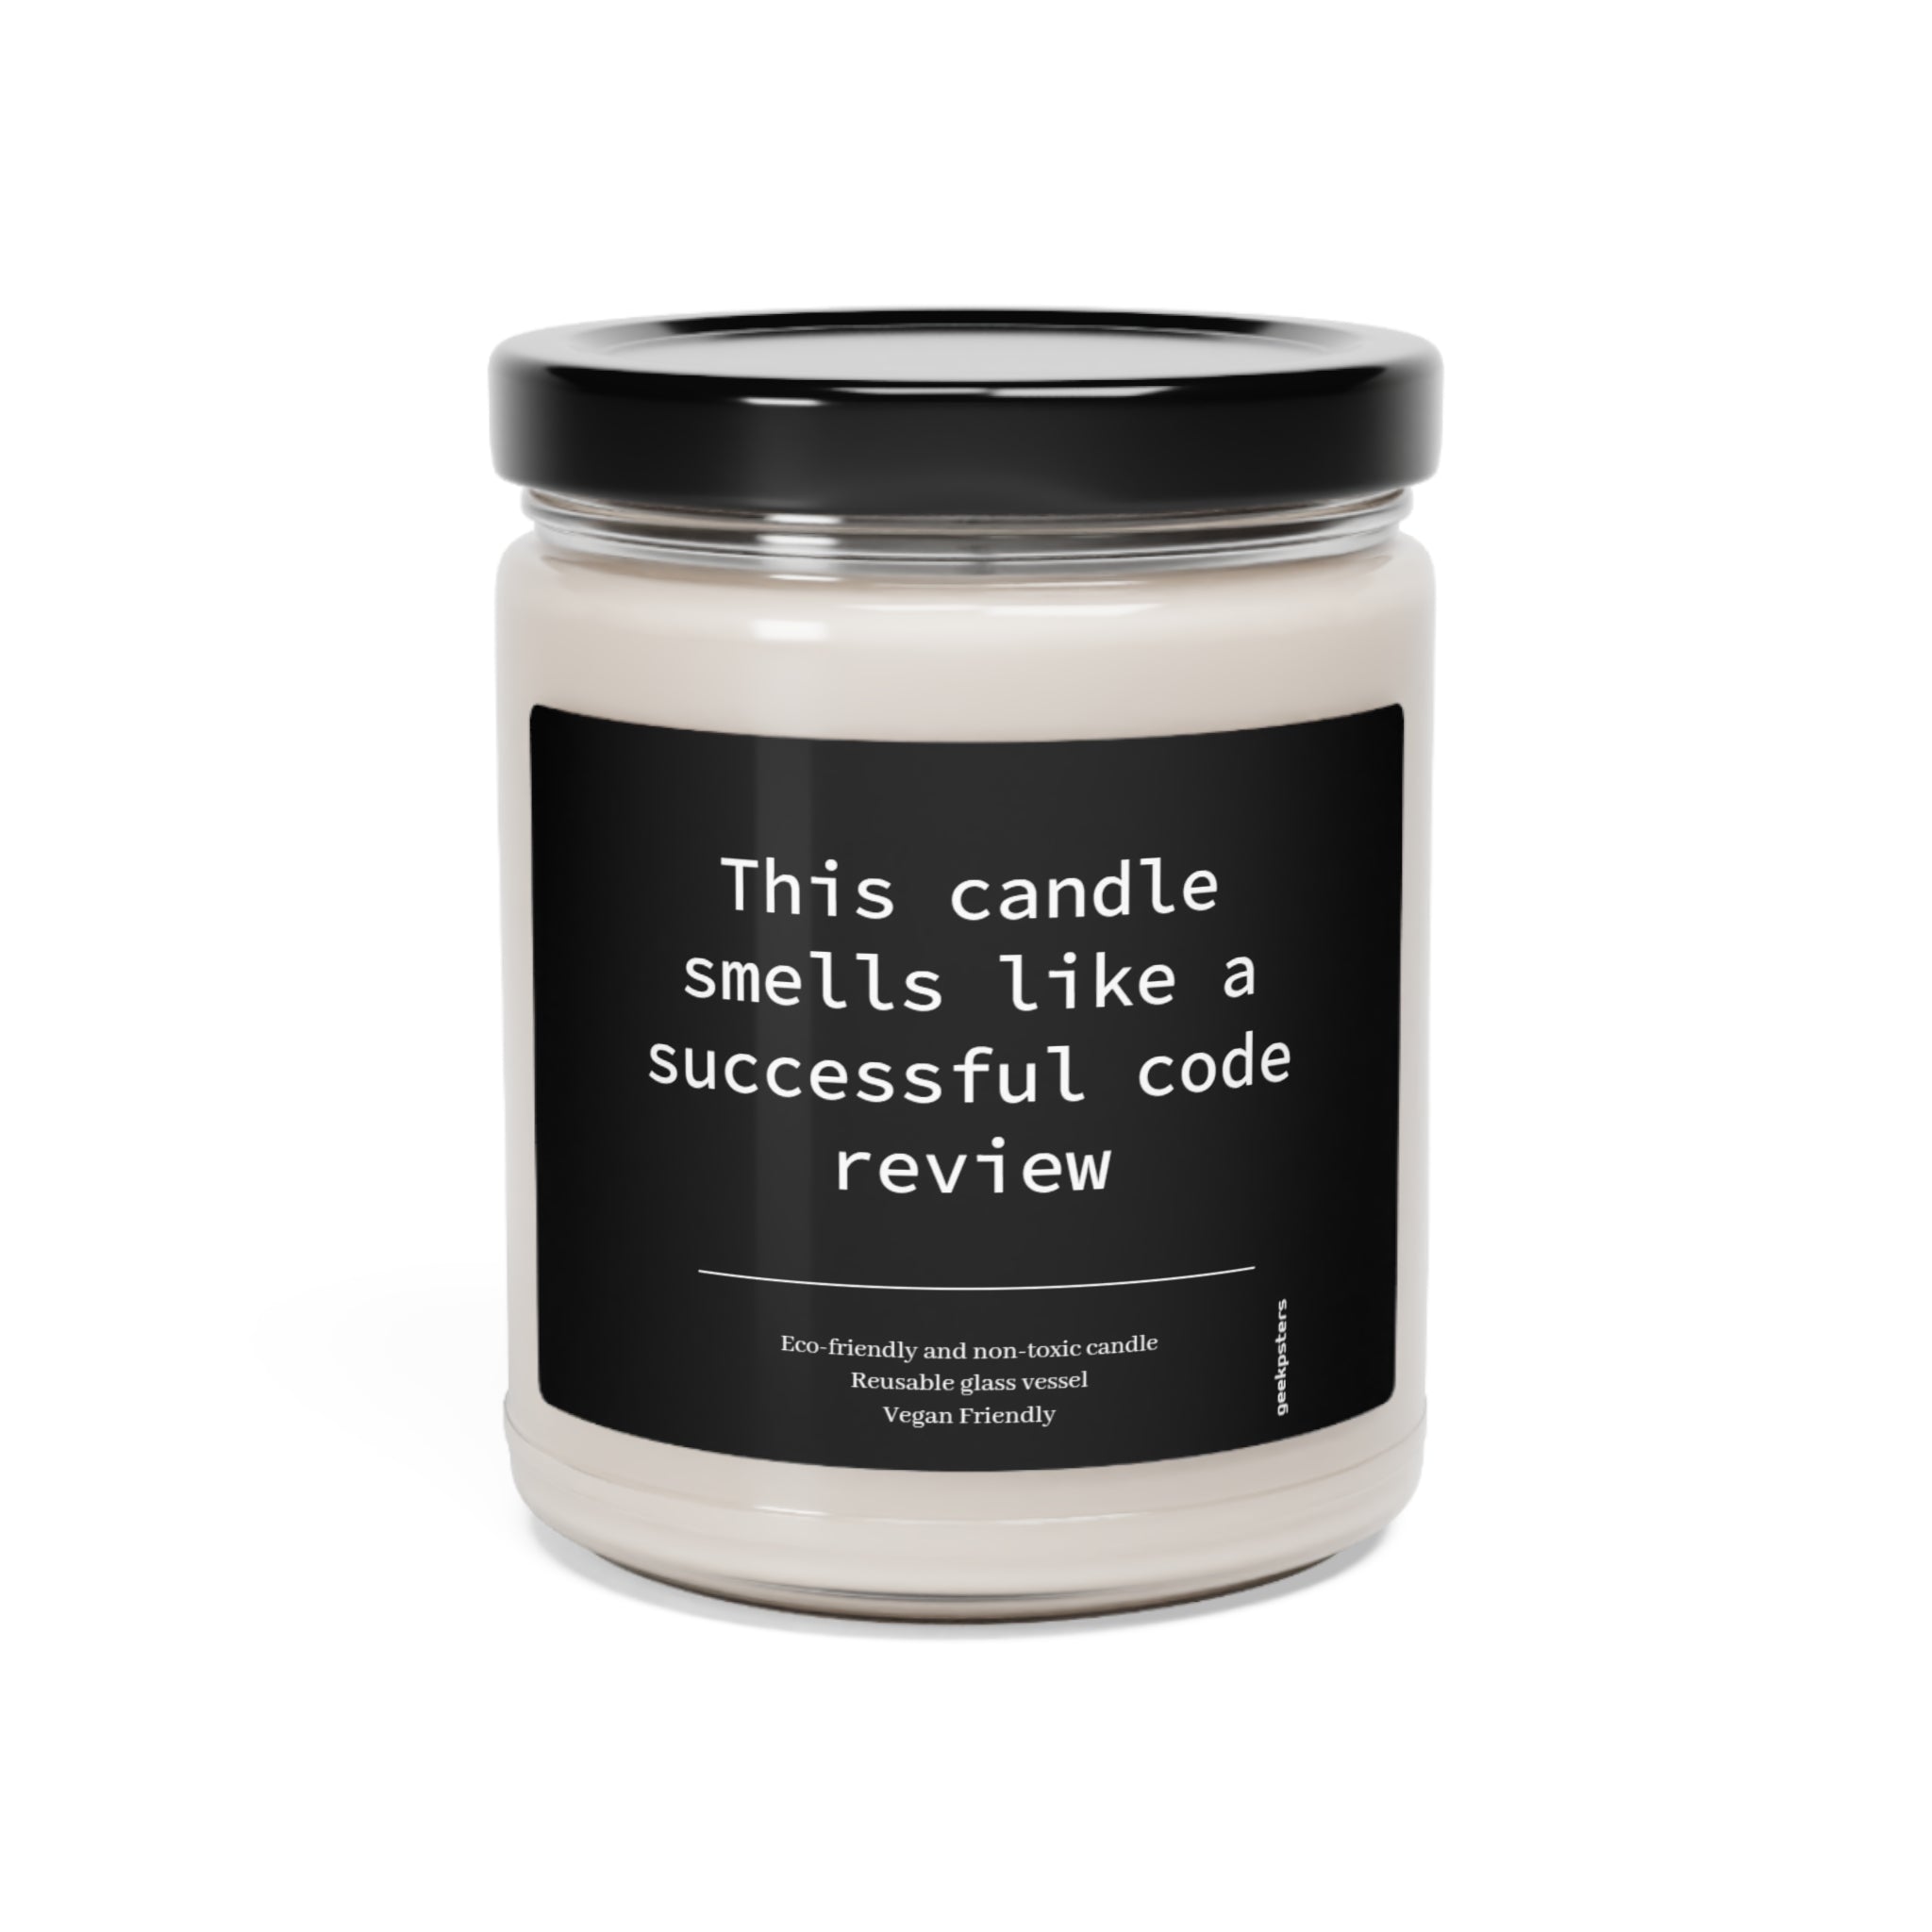 A This Candle Smells like a Successful Code Review scented soy candle in a clear jar, indicating eco-friendly and vegan-friendly properties.